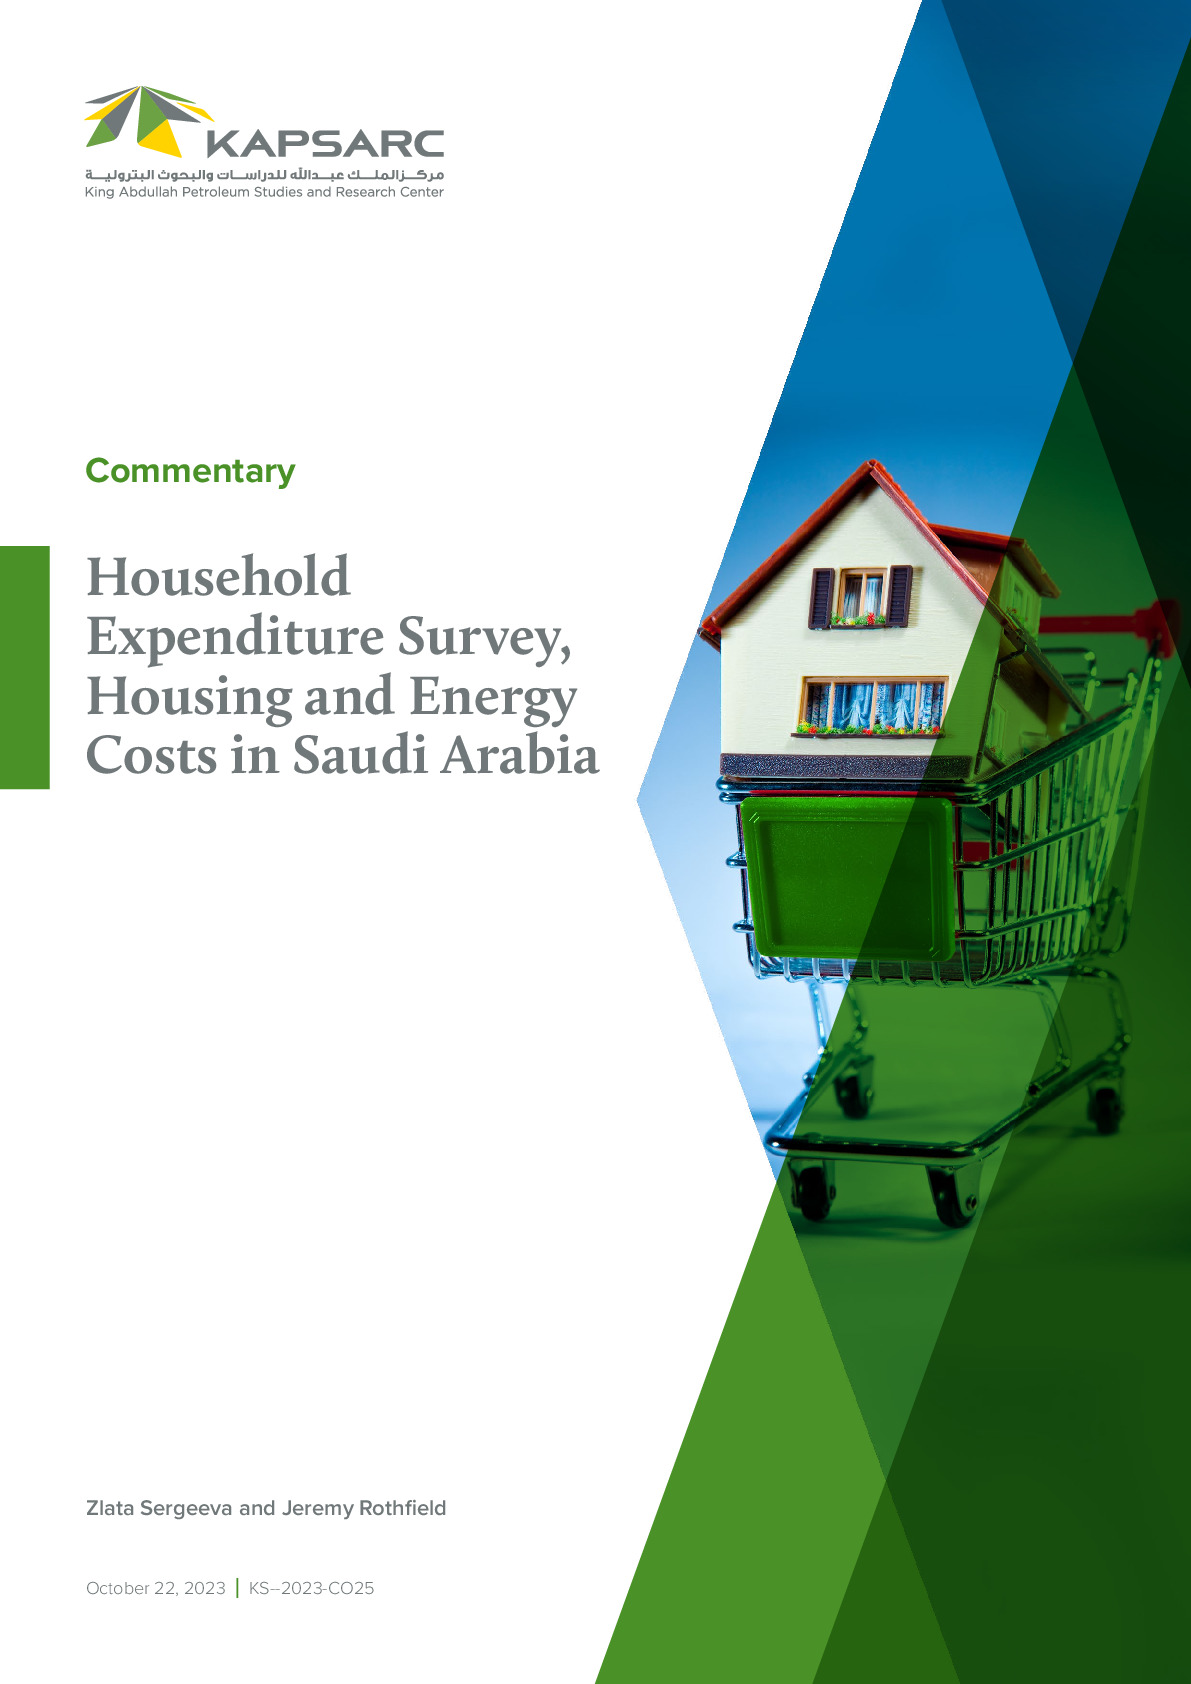 Household Expenditure Survey, Housing and Energy Costs in Saudi Arabia